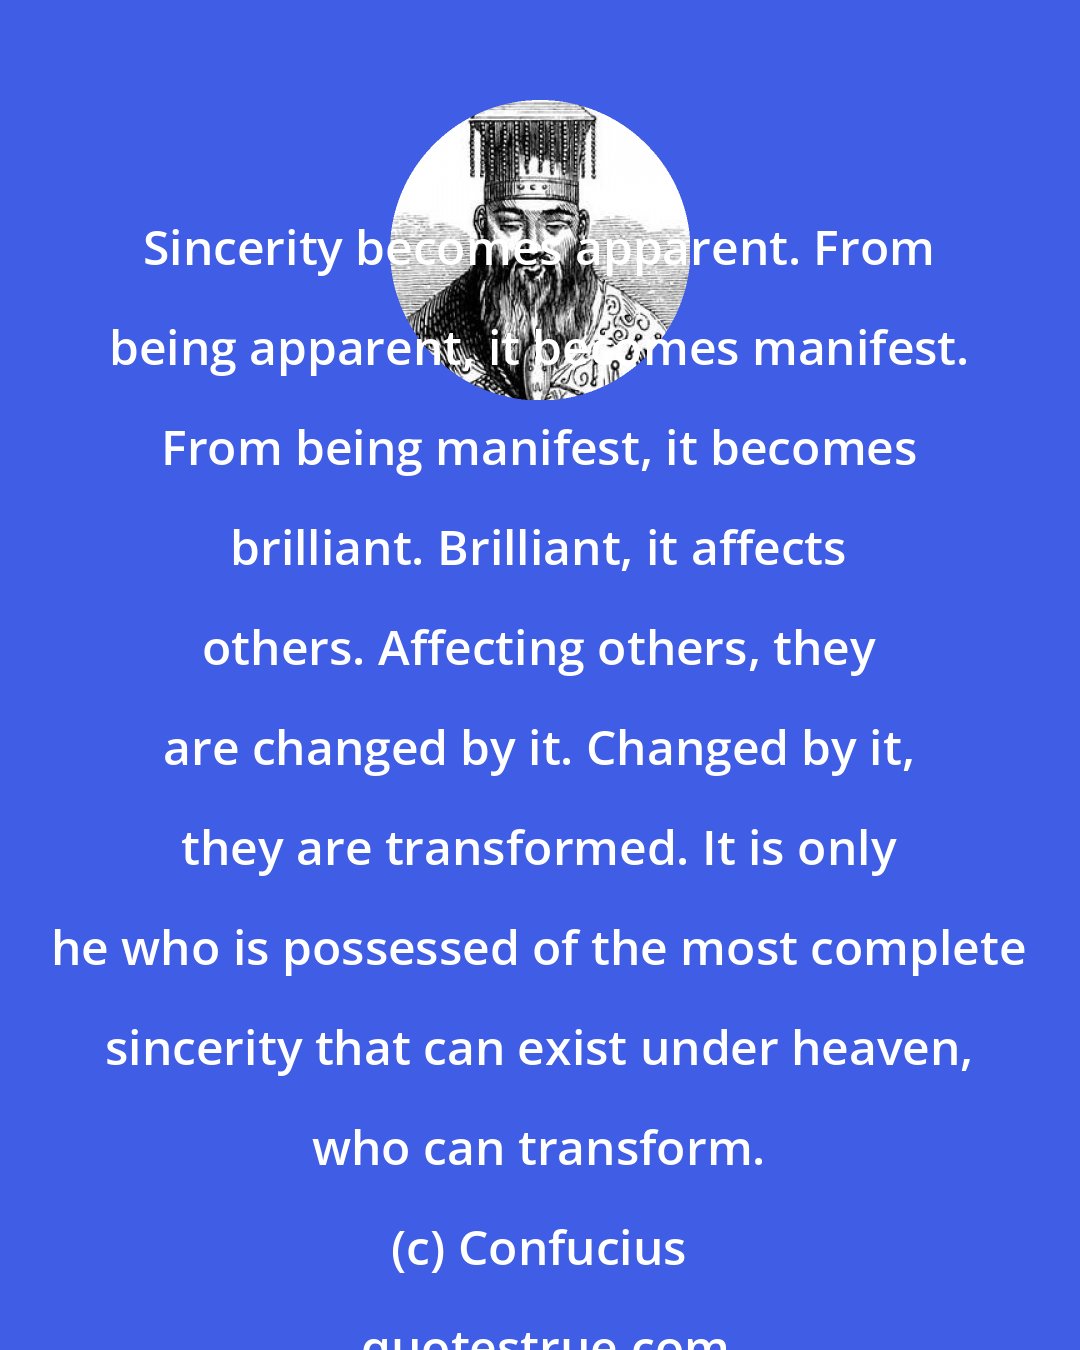 Confucius: Sincerity becomes apparent. From being apparent, it becomes manifest. From being manifest, it becomes brilliant. Brilliant, it affects others. Affecting others, they are changed by it. Changed by it, they are transformed. It is only he who is possessed of the most complete sincerity that can exist under heaven, who can transform.